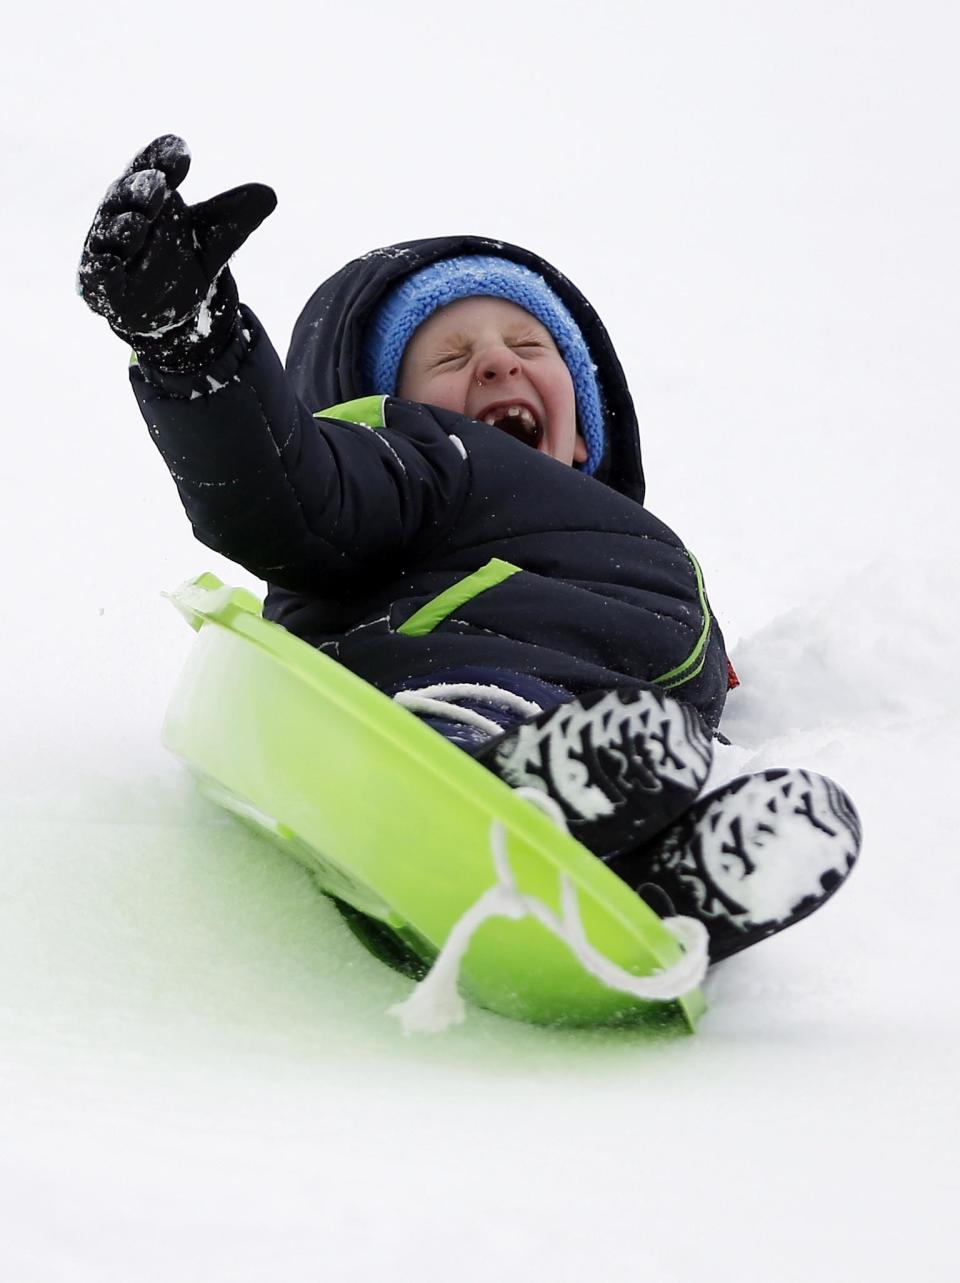 Mitchell Clark, 7, slides down a hill during his first sledding of the season at Reid Middle School in Pittsfield, Mass., on Saturday, Dec. 17, 2016. A winter storm of snow, freezing rain and bone-chilling temperatures hit the nationss mid-section and East Coast on Saturday. (Stephanie Zollshan/The Berkshire Eagle via AP)